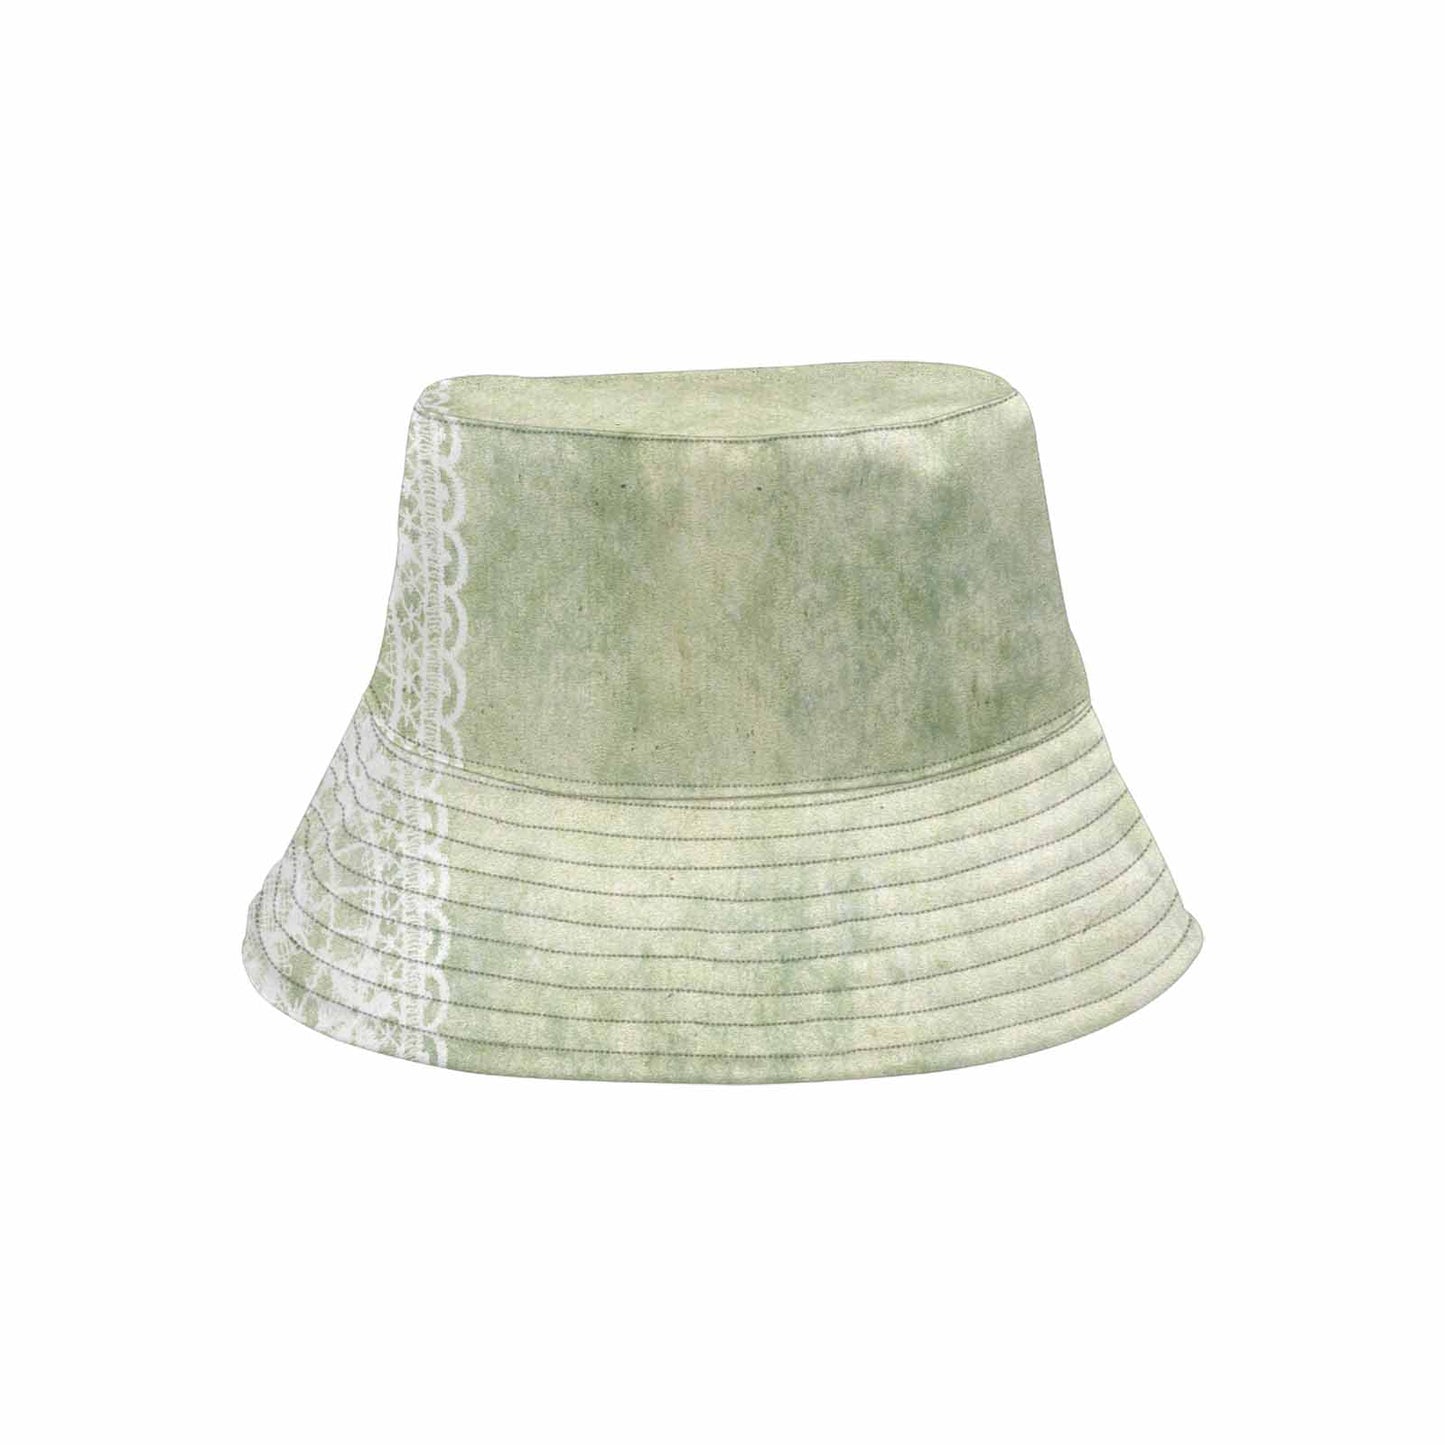 Victorian lace Bucket Hat, outdoors hat, design 42